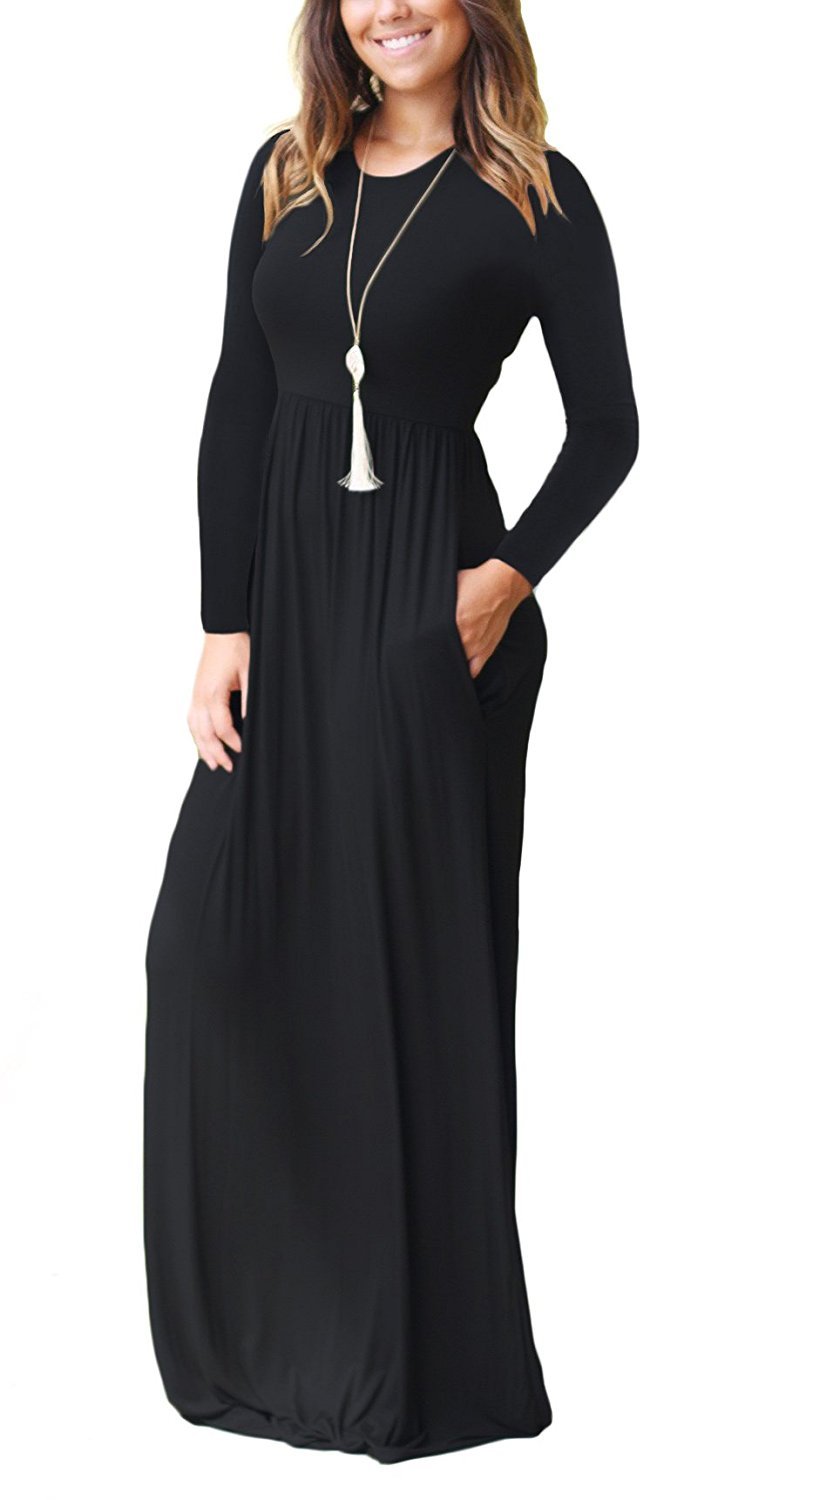 GRECERELLE Women's Long Sleeve Loose Plain Maxi Dresses Casual Long Dresses with Pockets